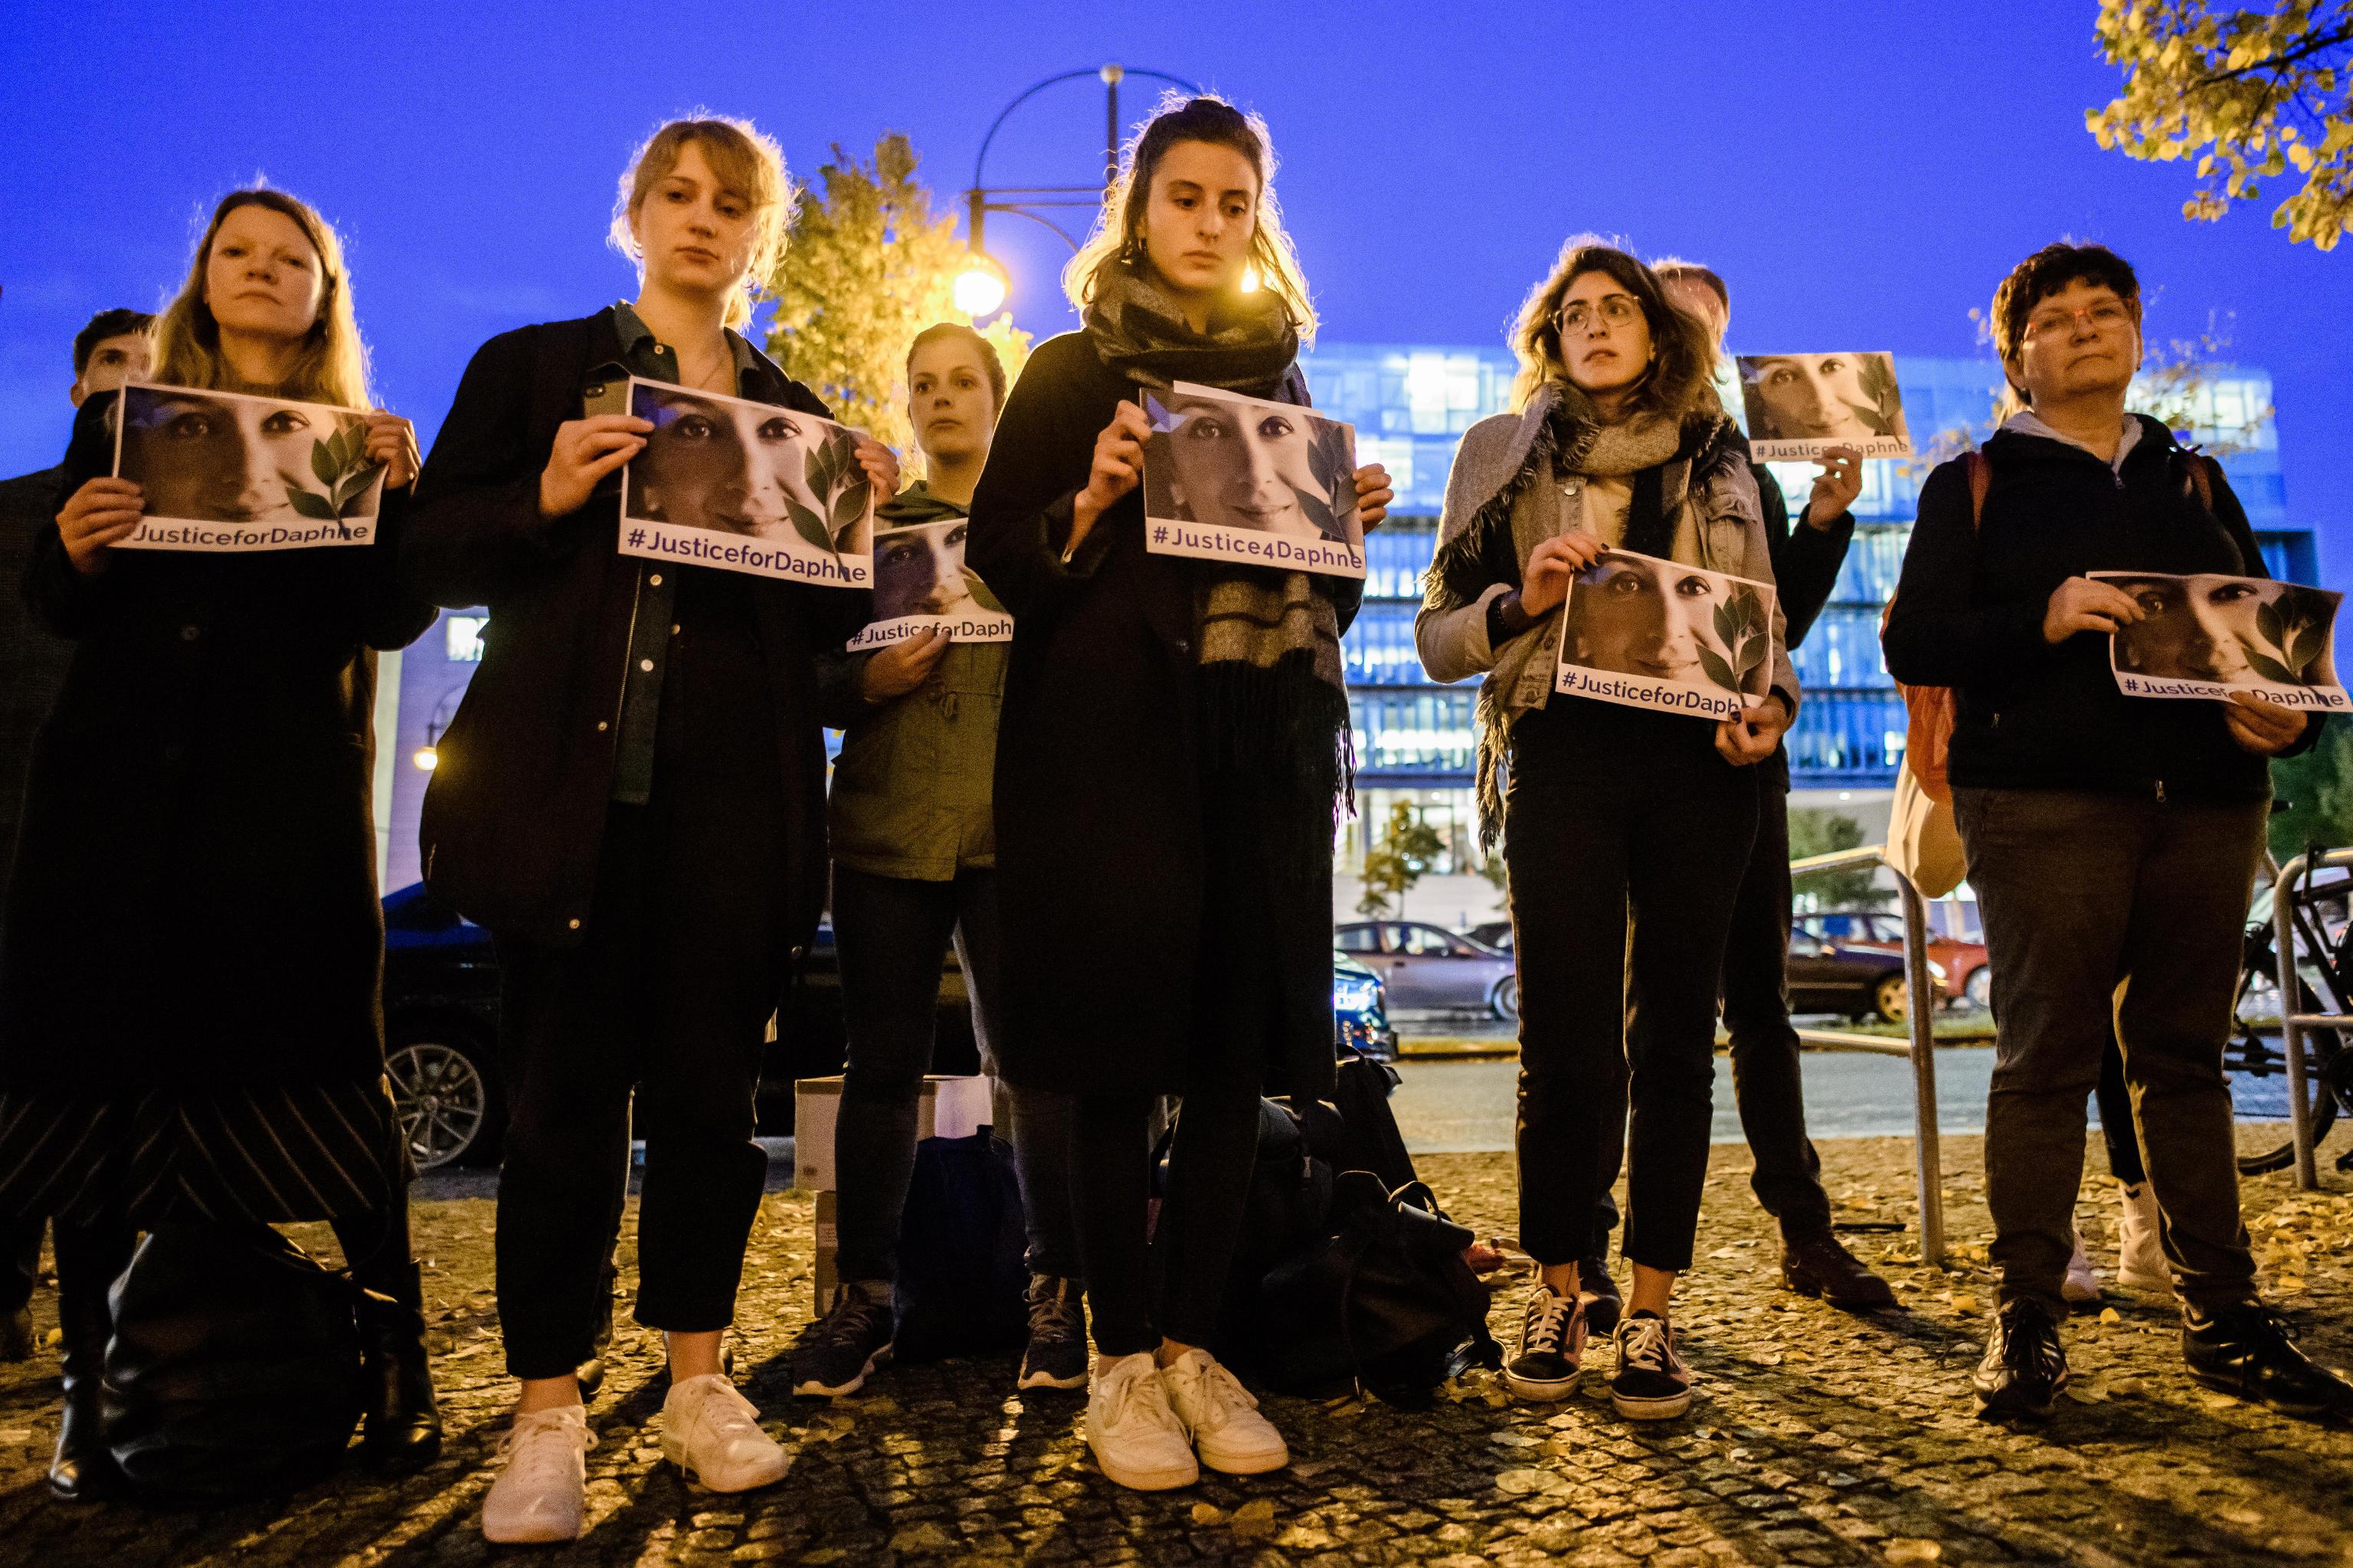 epa07925852 People stand together during a picket in front of the Maltese embassy for murdered journalist Daphne Caruana Galizia in Berlin, Germany, 16 October 2019. Reporters Without Borders organized a picket for murdered journalist Daphne Caruana Galizia, who was killed on 16 October 2017 in Malta, while investigating the Panama Papers case.  EPA/CLEMENS BILAN